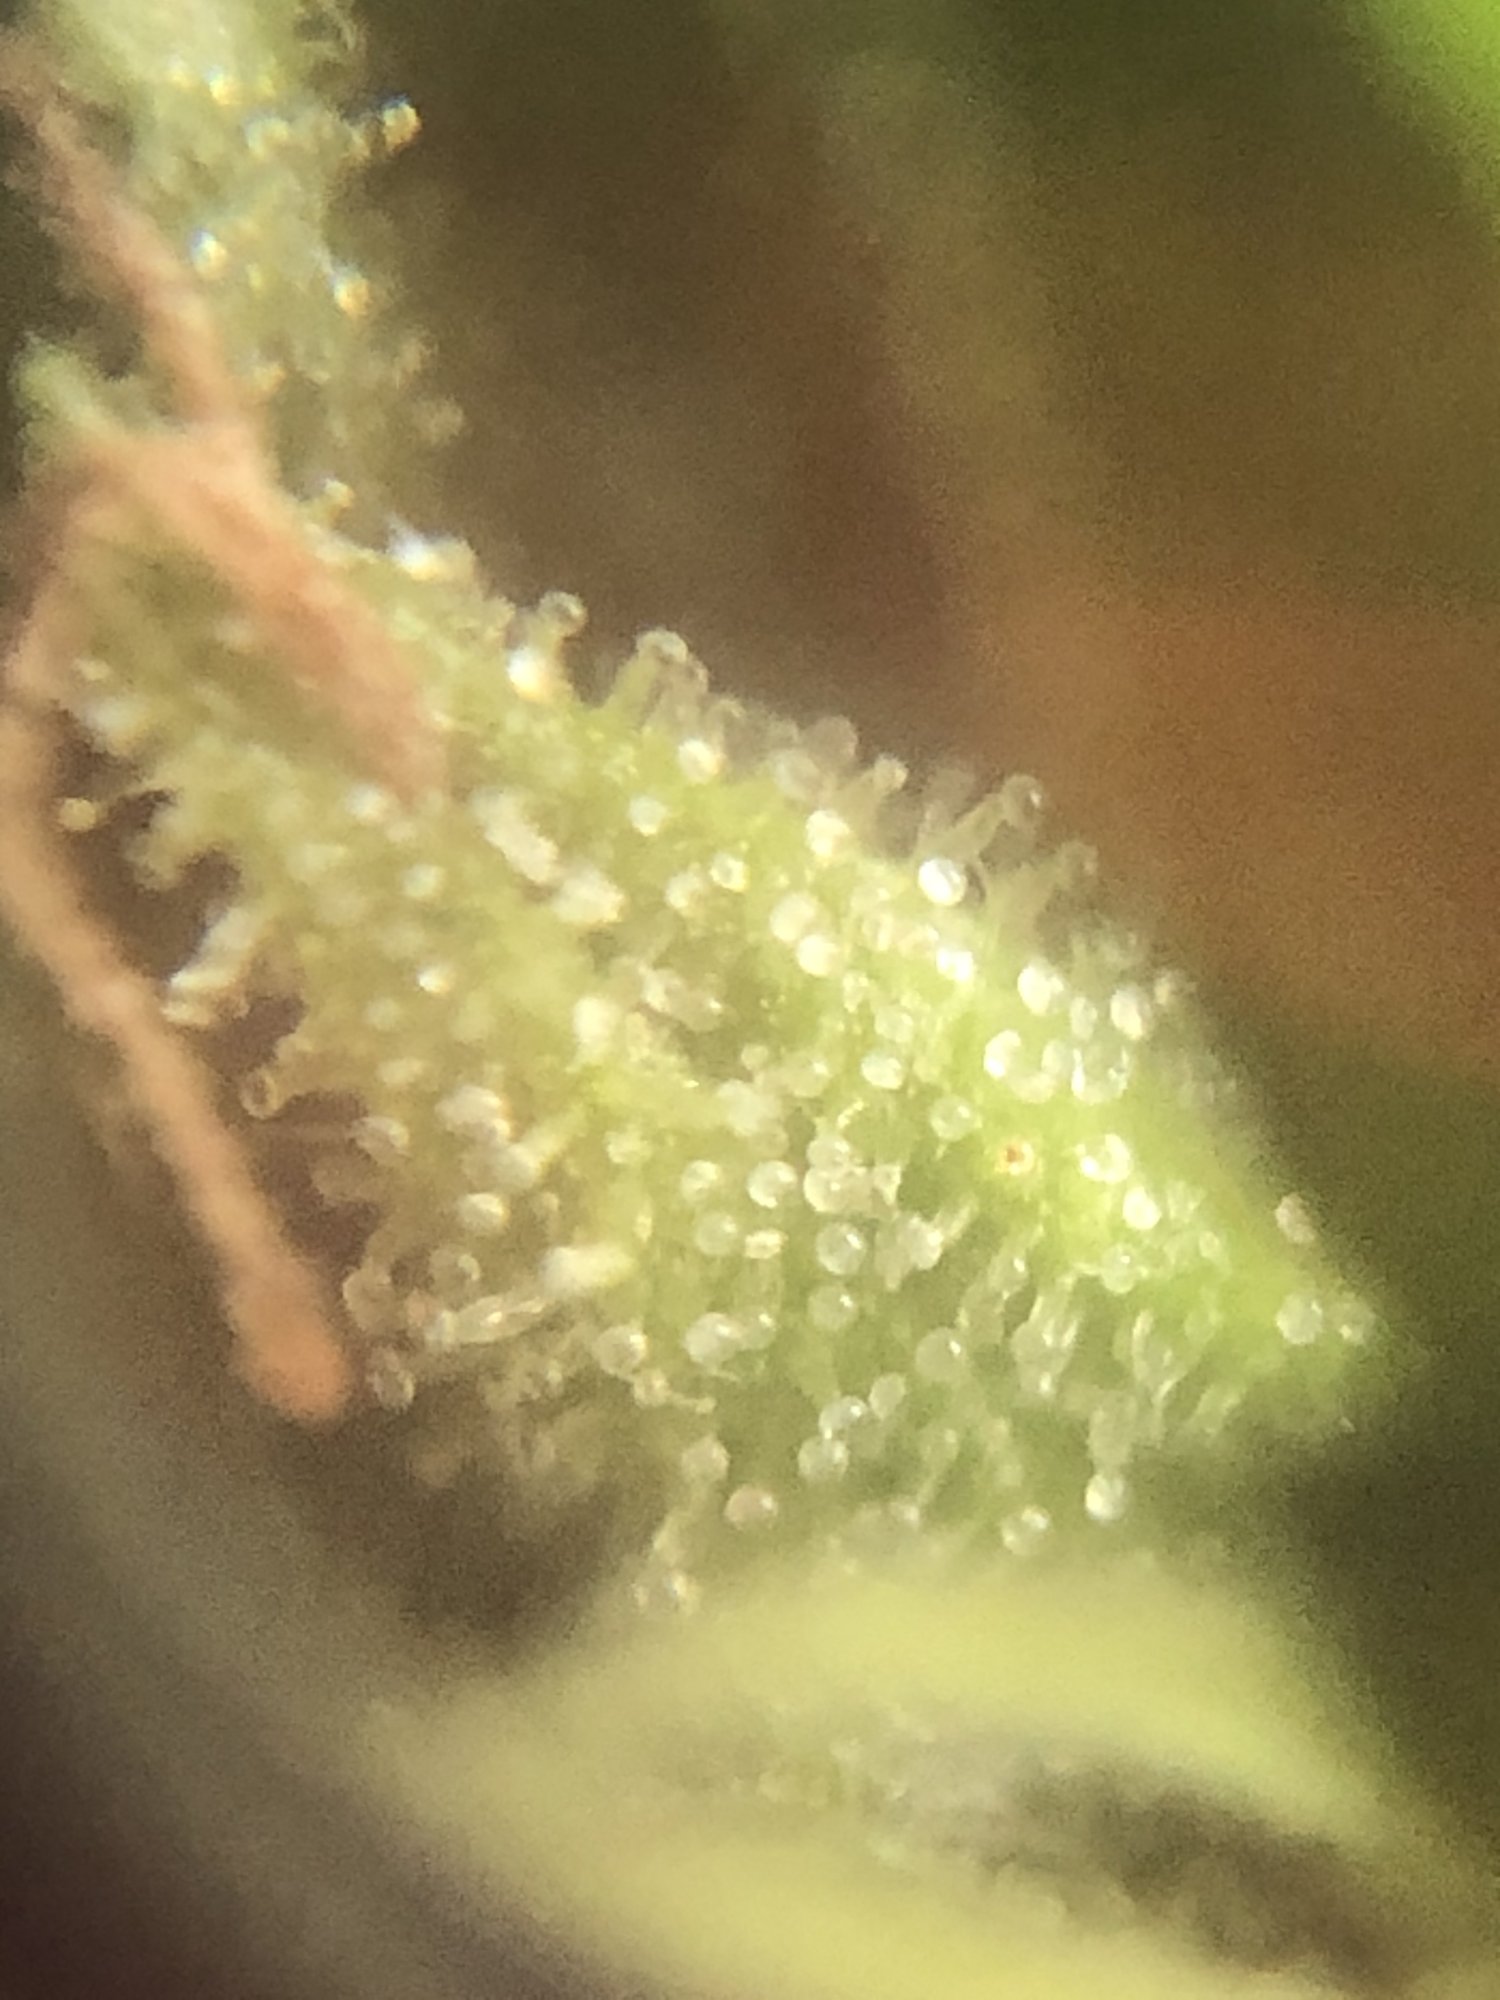 Do my trichomes look milky enough or should i wait longer